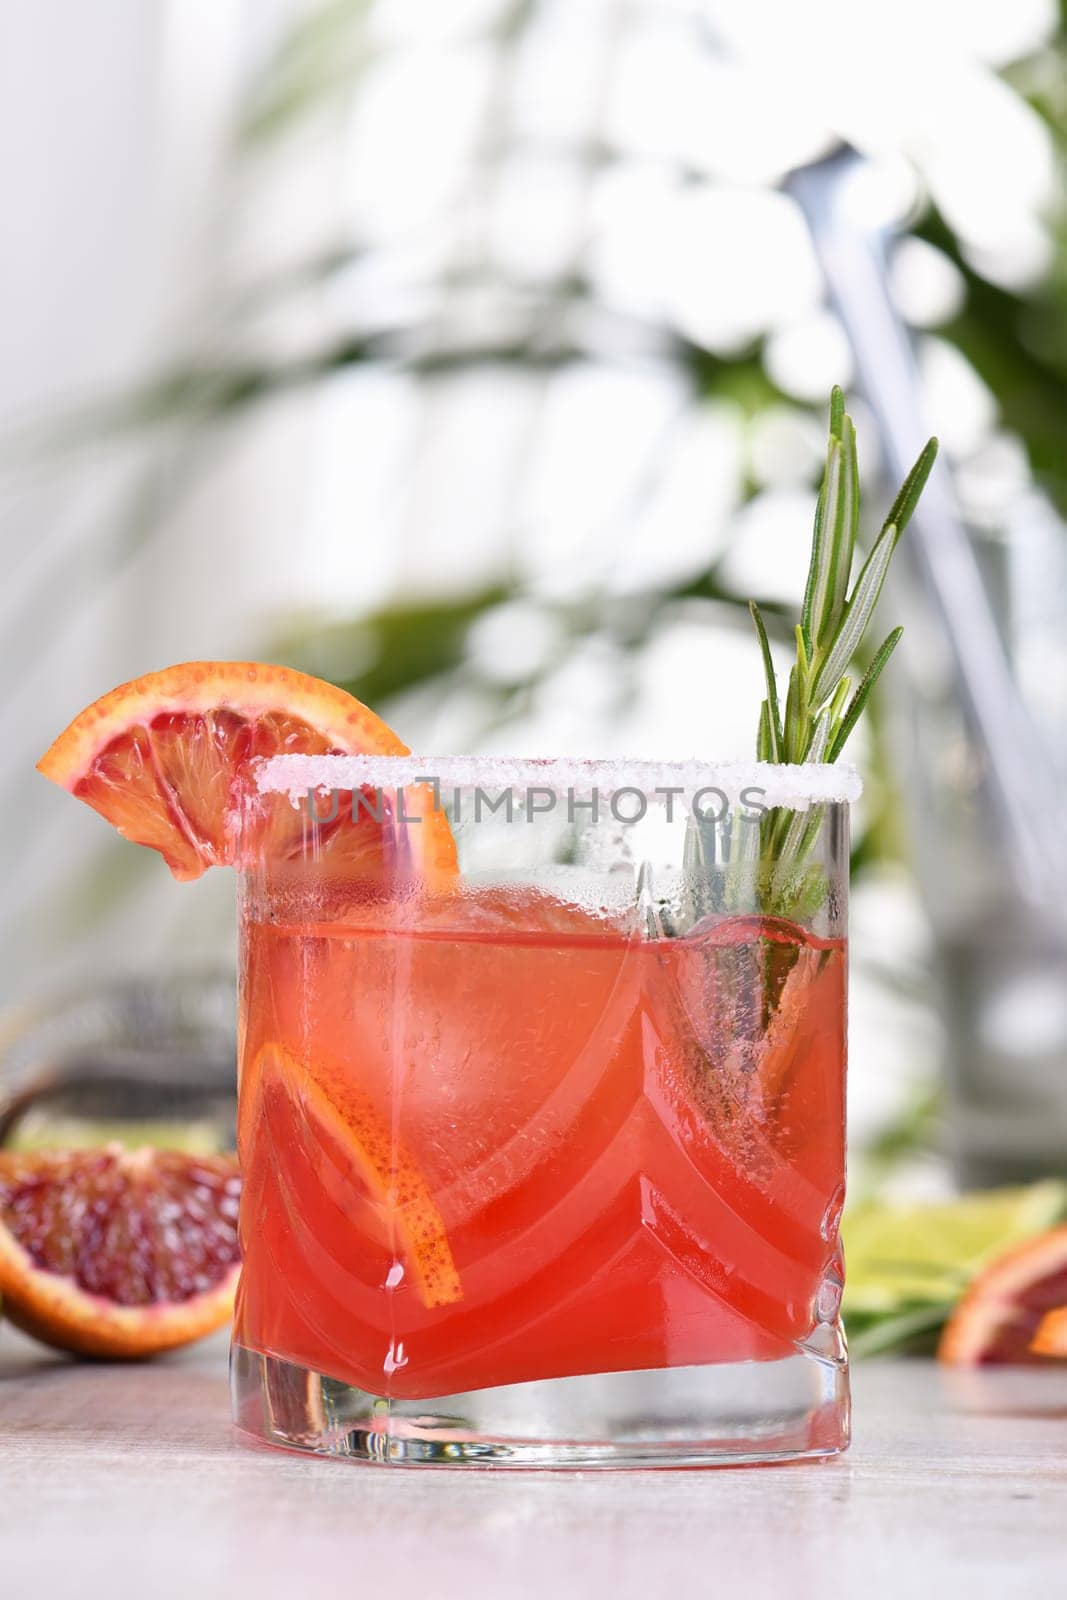 Red Sicilian Orange Paloma Cocktail of tequila, fresh lime and rosemary with red Sicilian orange juice. This cocktail is full of bright citrus aromas and herbs. Indulge your palate with an excellent drink.